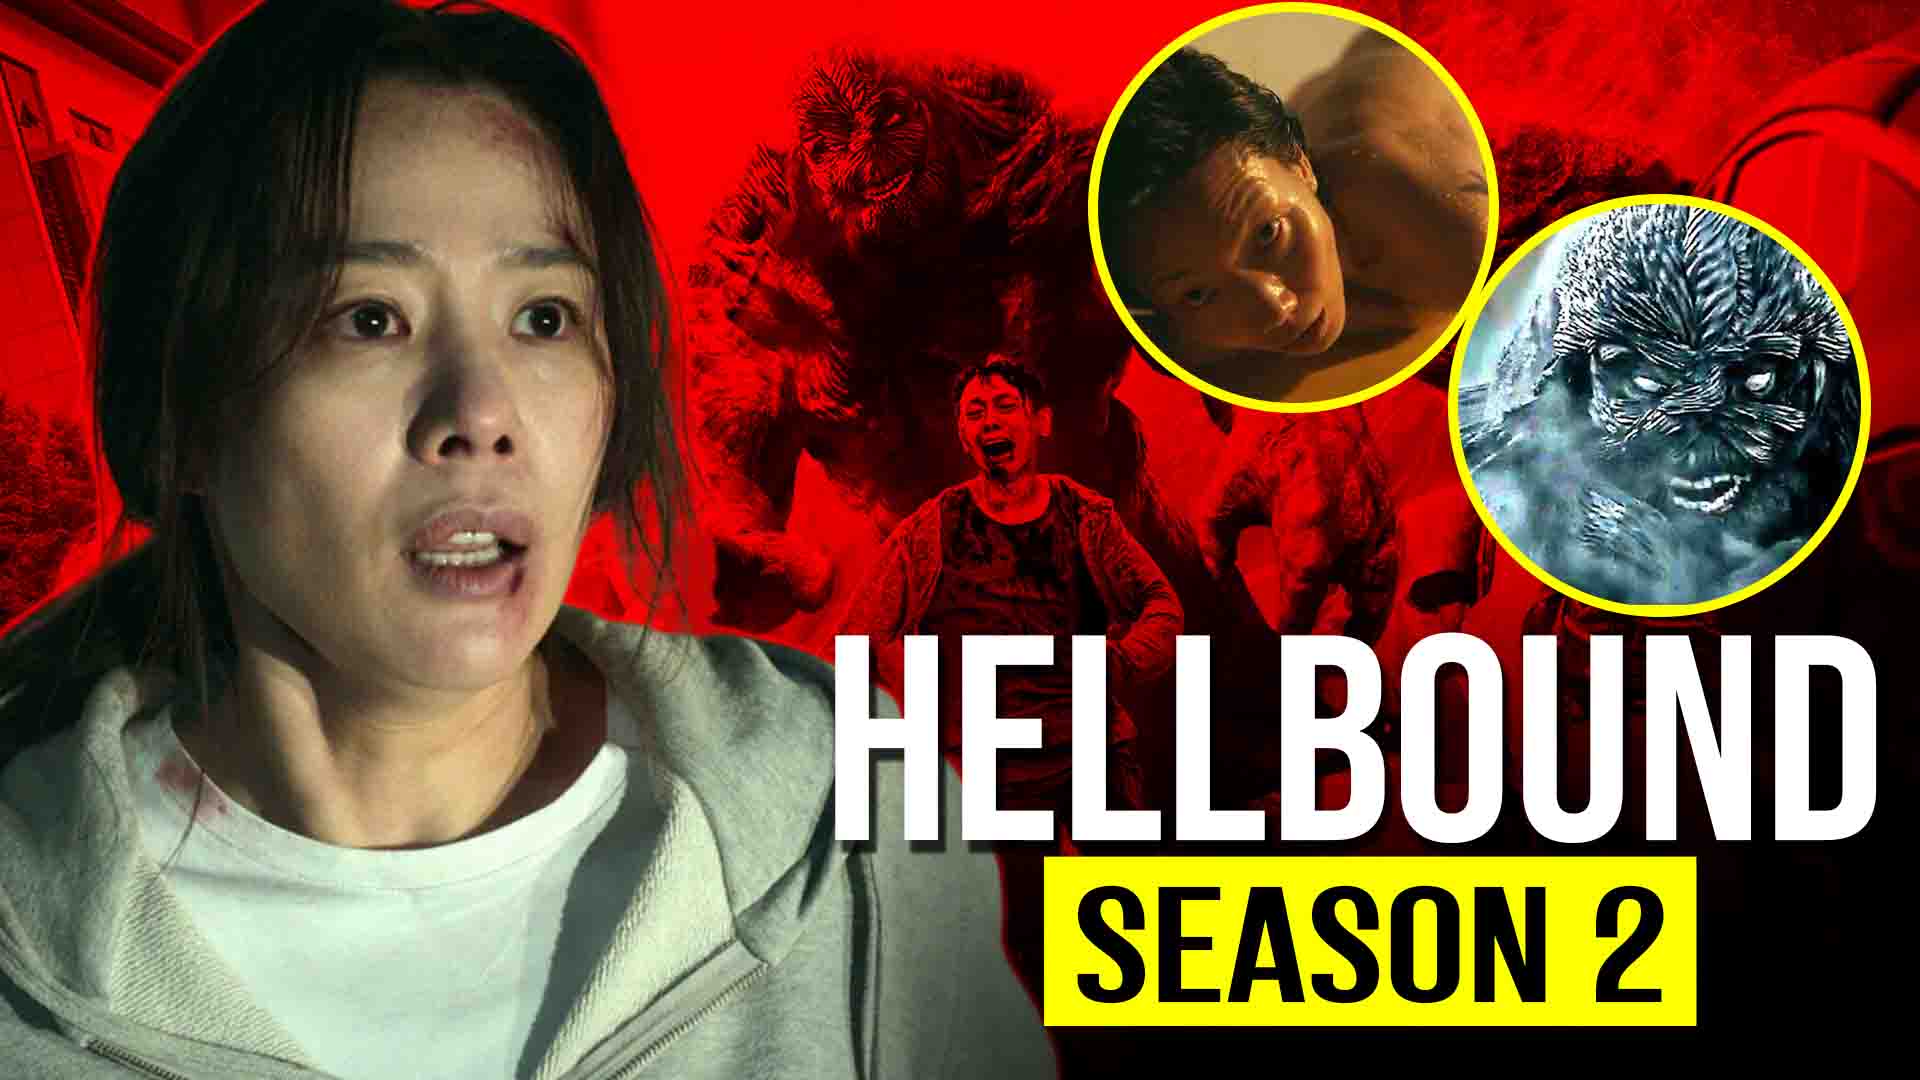 Hellbound Season 2 “Potential” Release Window and More!